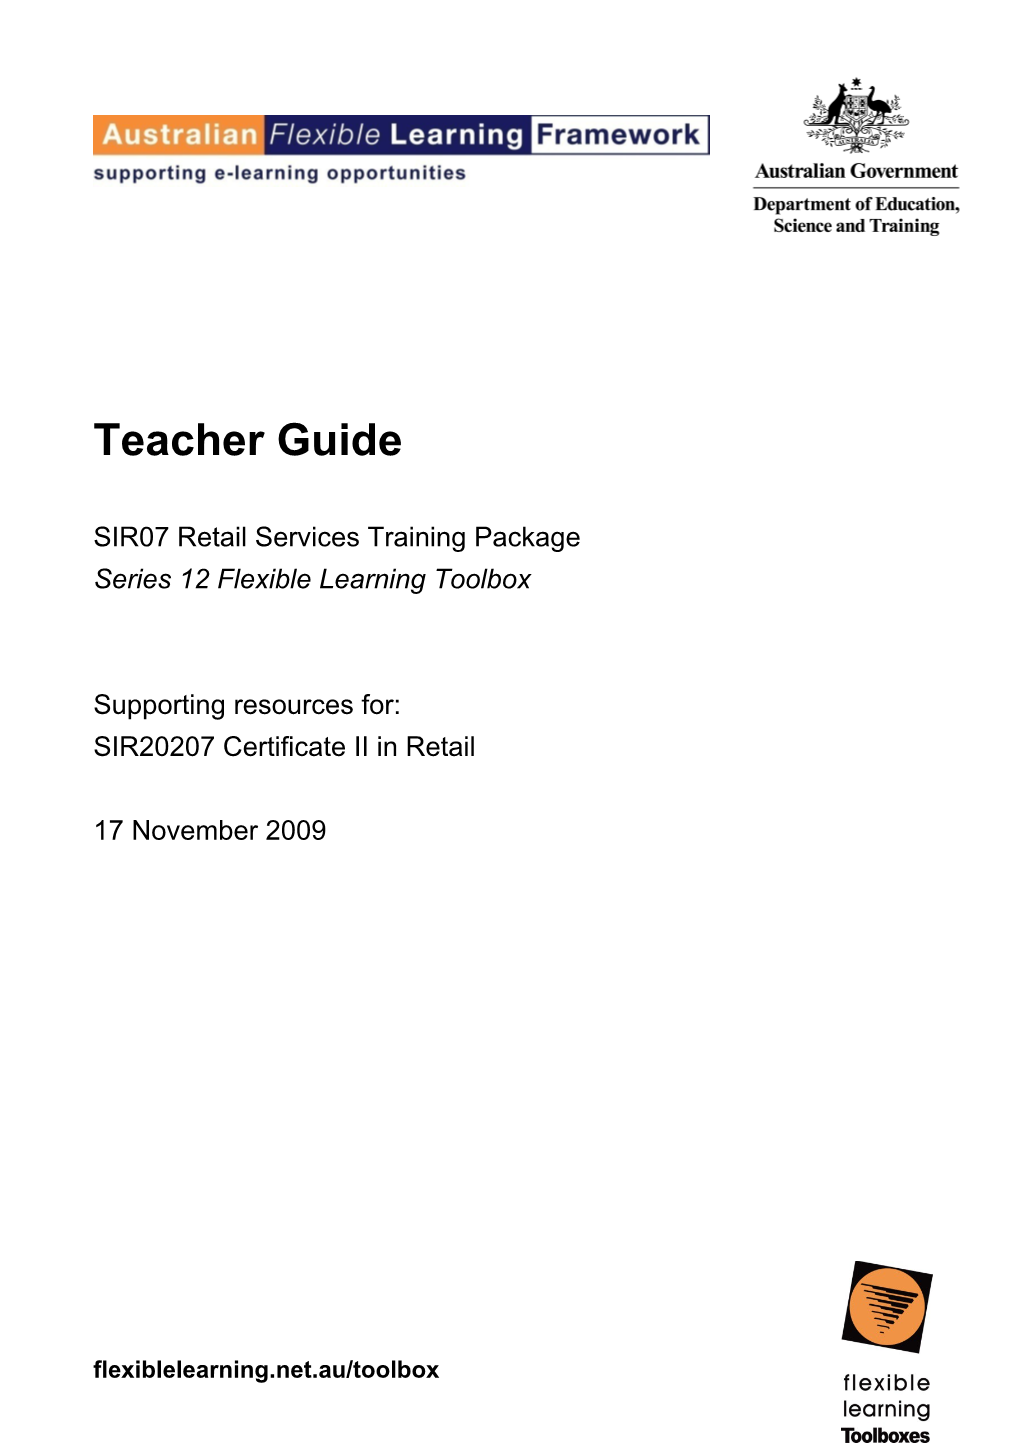 SIR07 Retail Services Training Package